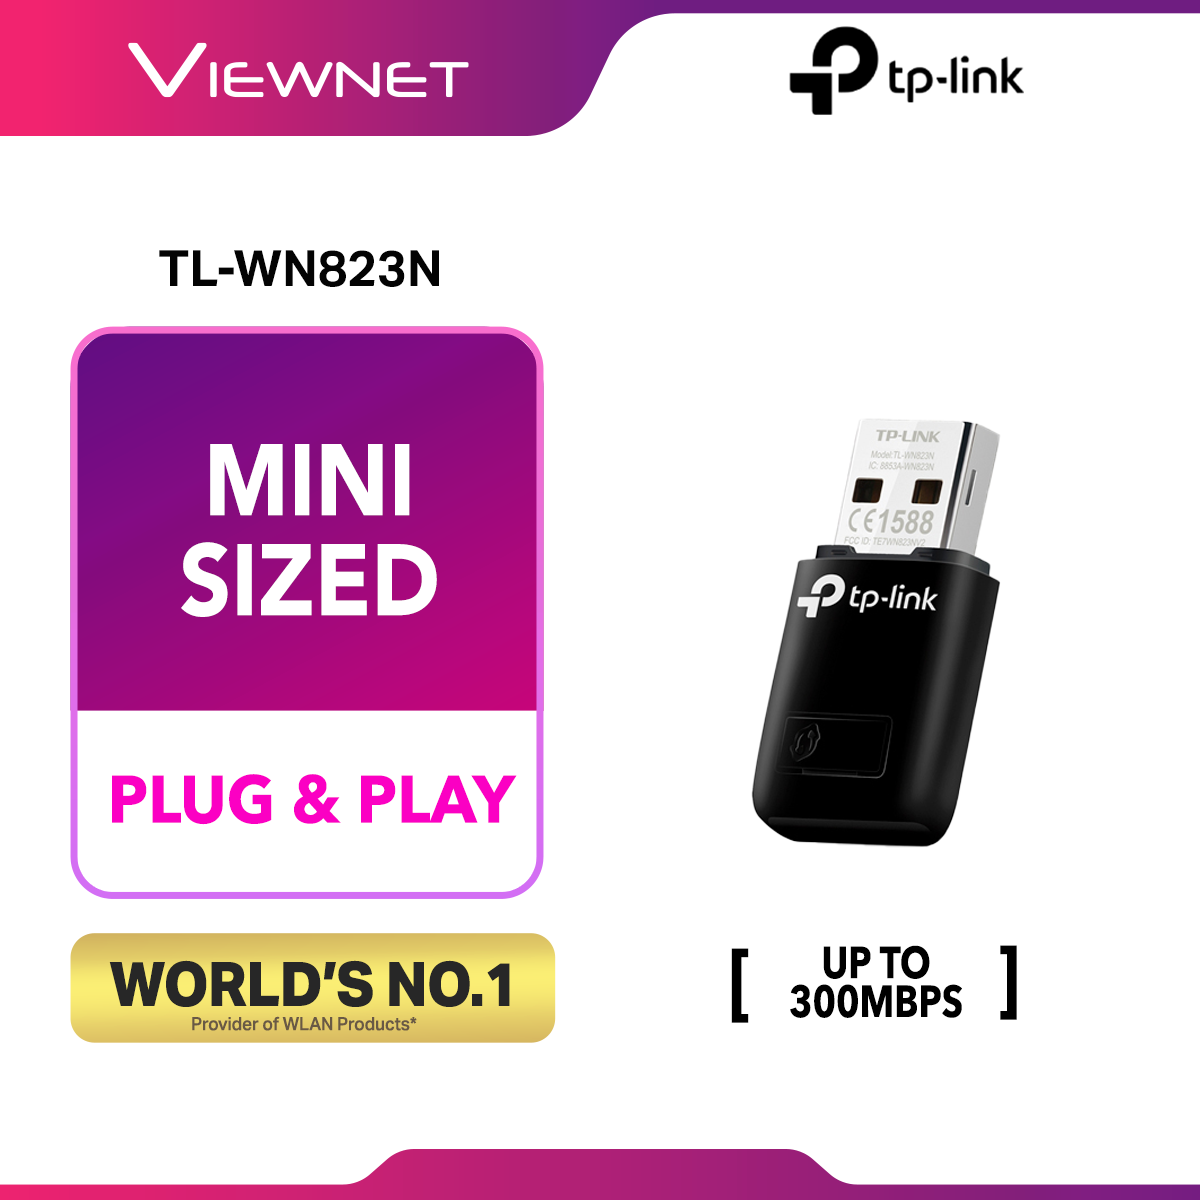 TP-LINK TL-WN823N Mini USB Wireless WIFI adapter with Soft AP, 300Mbps